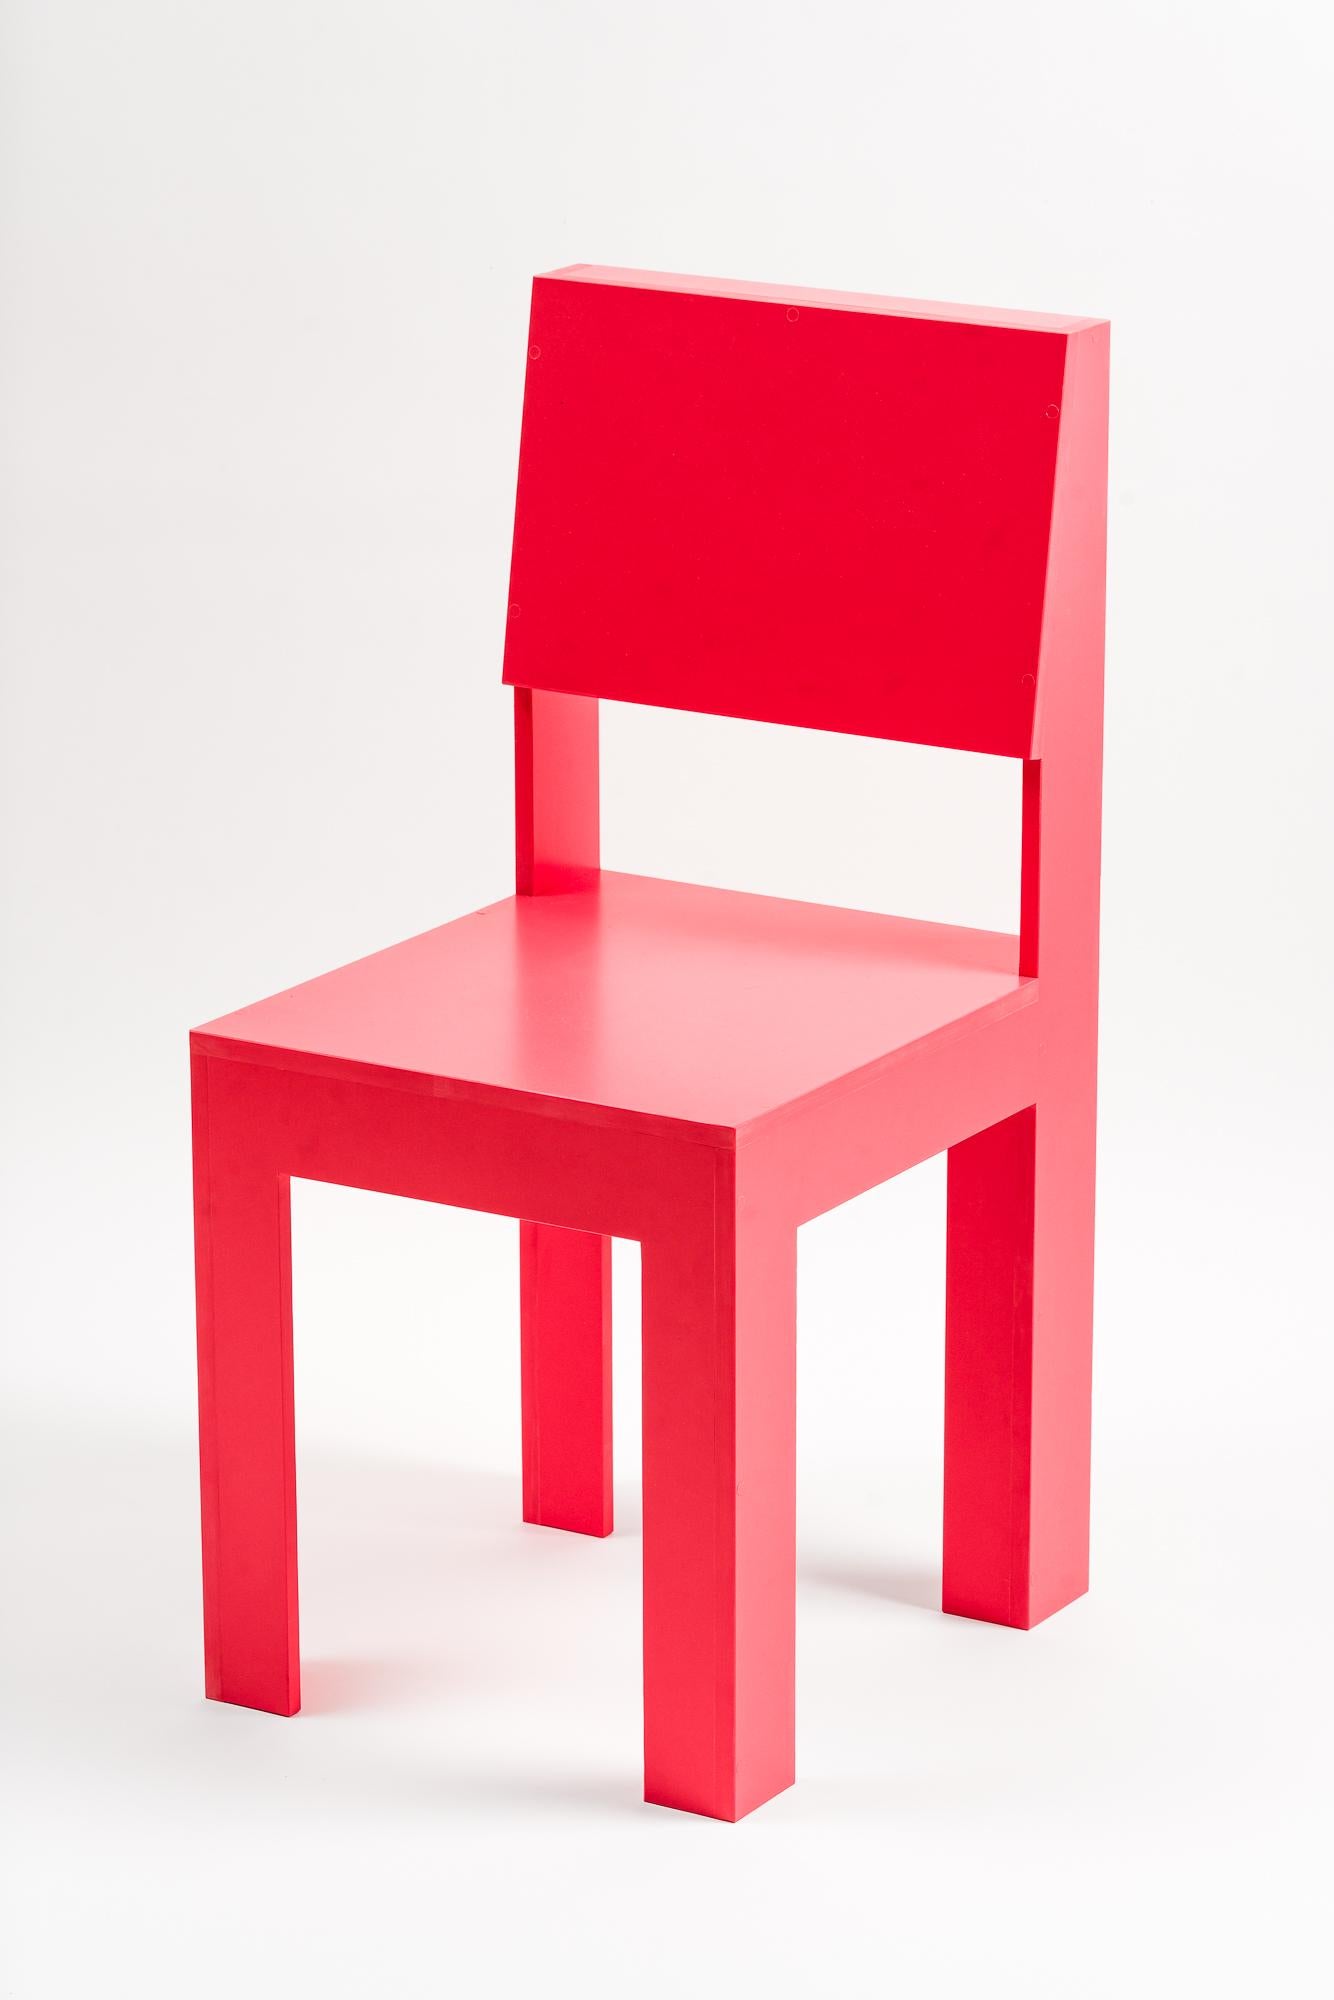 British Post-Consumer Recycled Plastic 'RCP2 Chair' in Solid Red by Jane Atfield For Sale